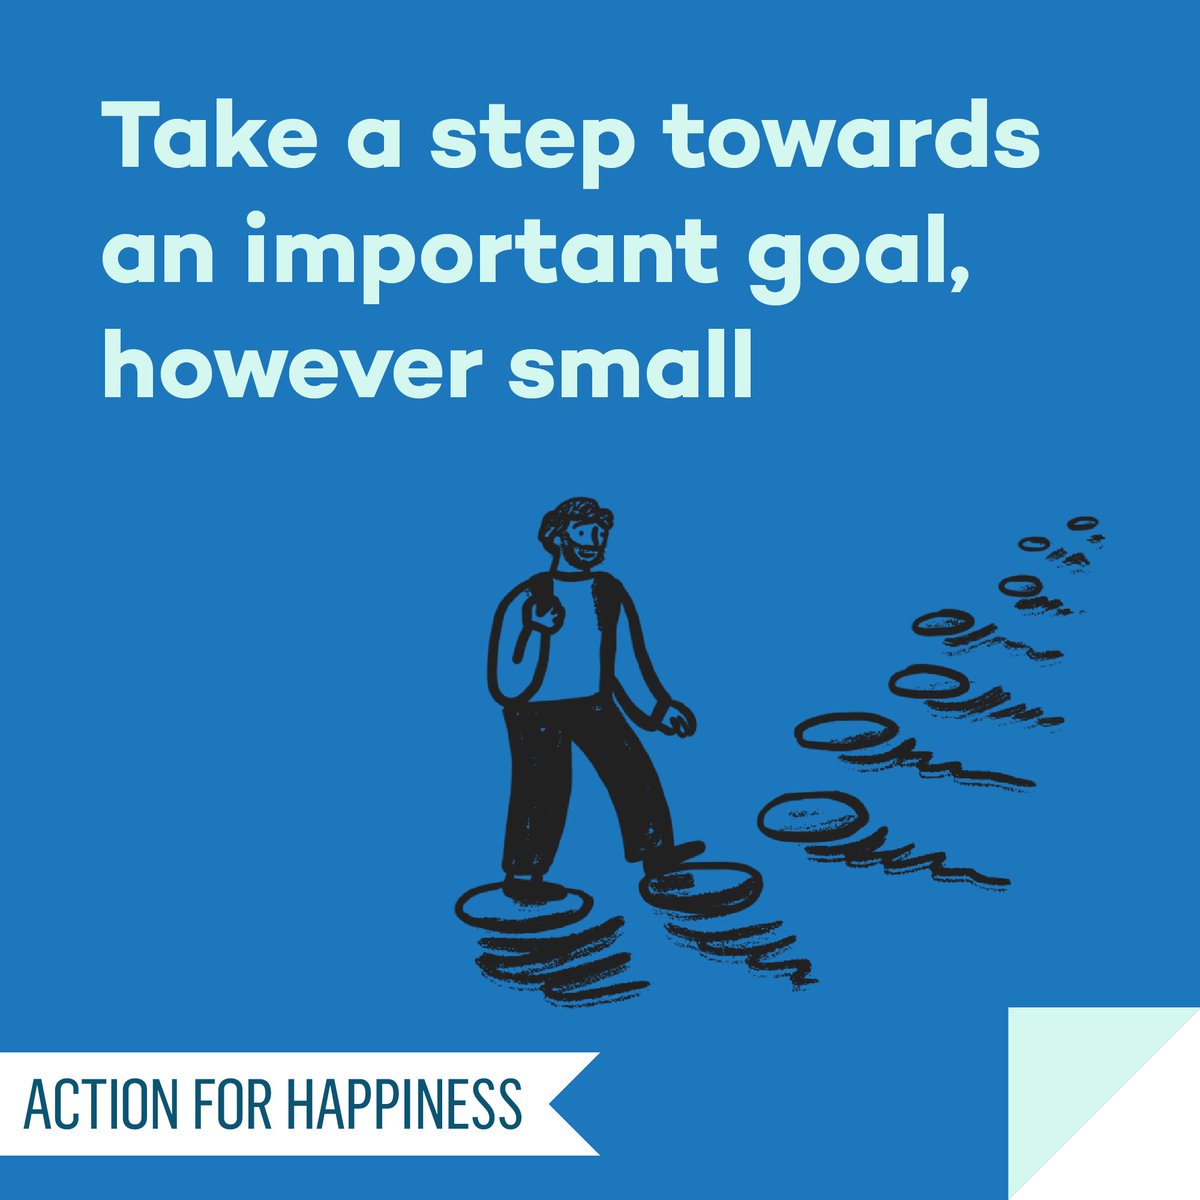 Meaningful May - Day 3: Take a step towards an important goal, however small actionforhappiness.org/meaningful-may #MeaningfulMay